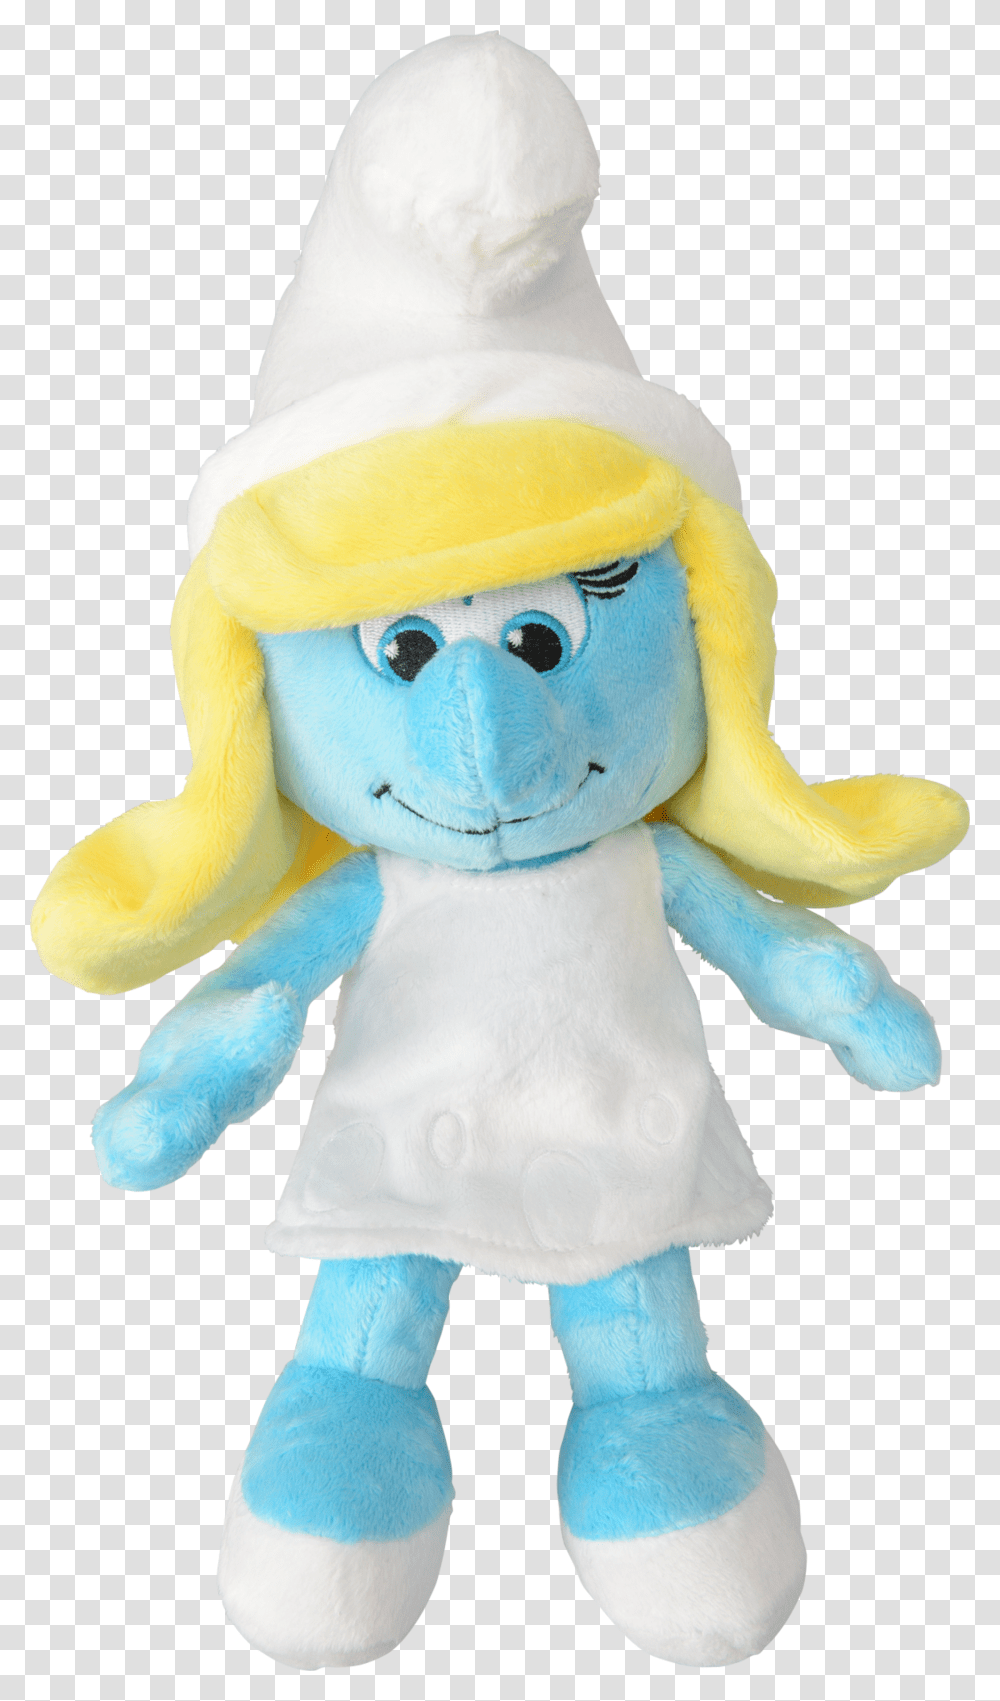 Smurfs Talking Plush Clumsy Smurf The Smurfs At Toys Stuffed Toy, Doll, Mascot Transparent Png